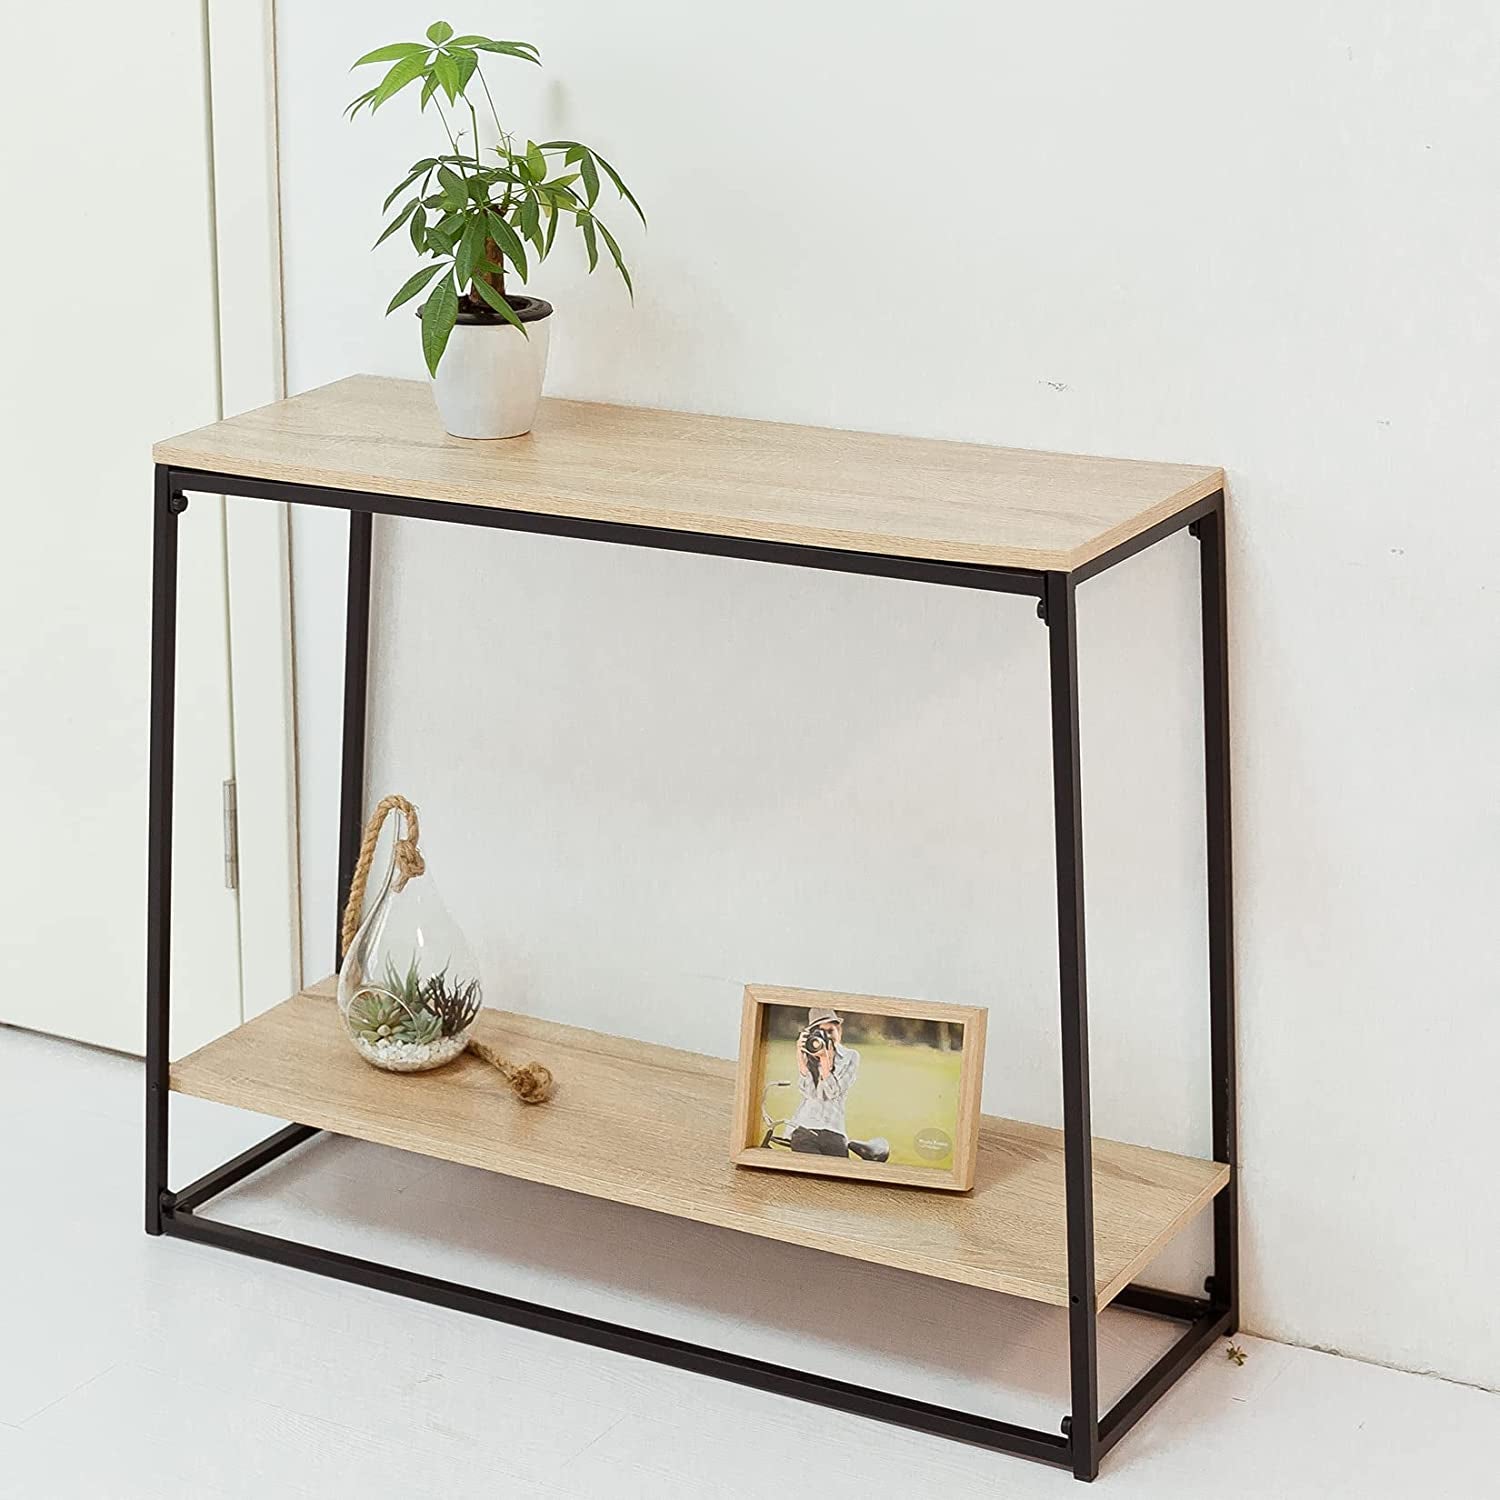 2 Shelf Console Table for Narrow Entry, Hallway or Sofa with Black Metal Frame